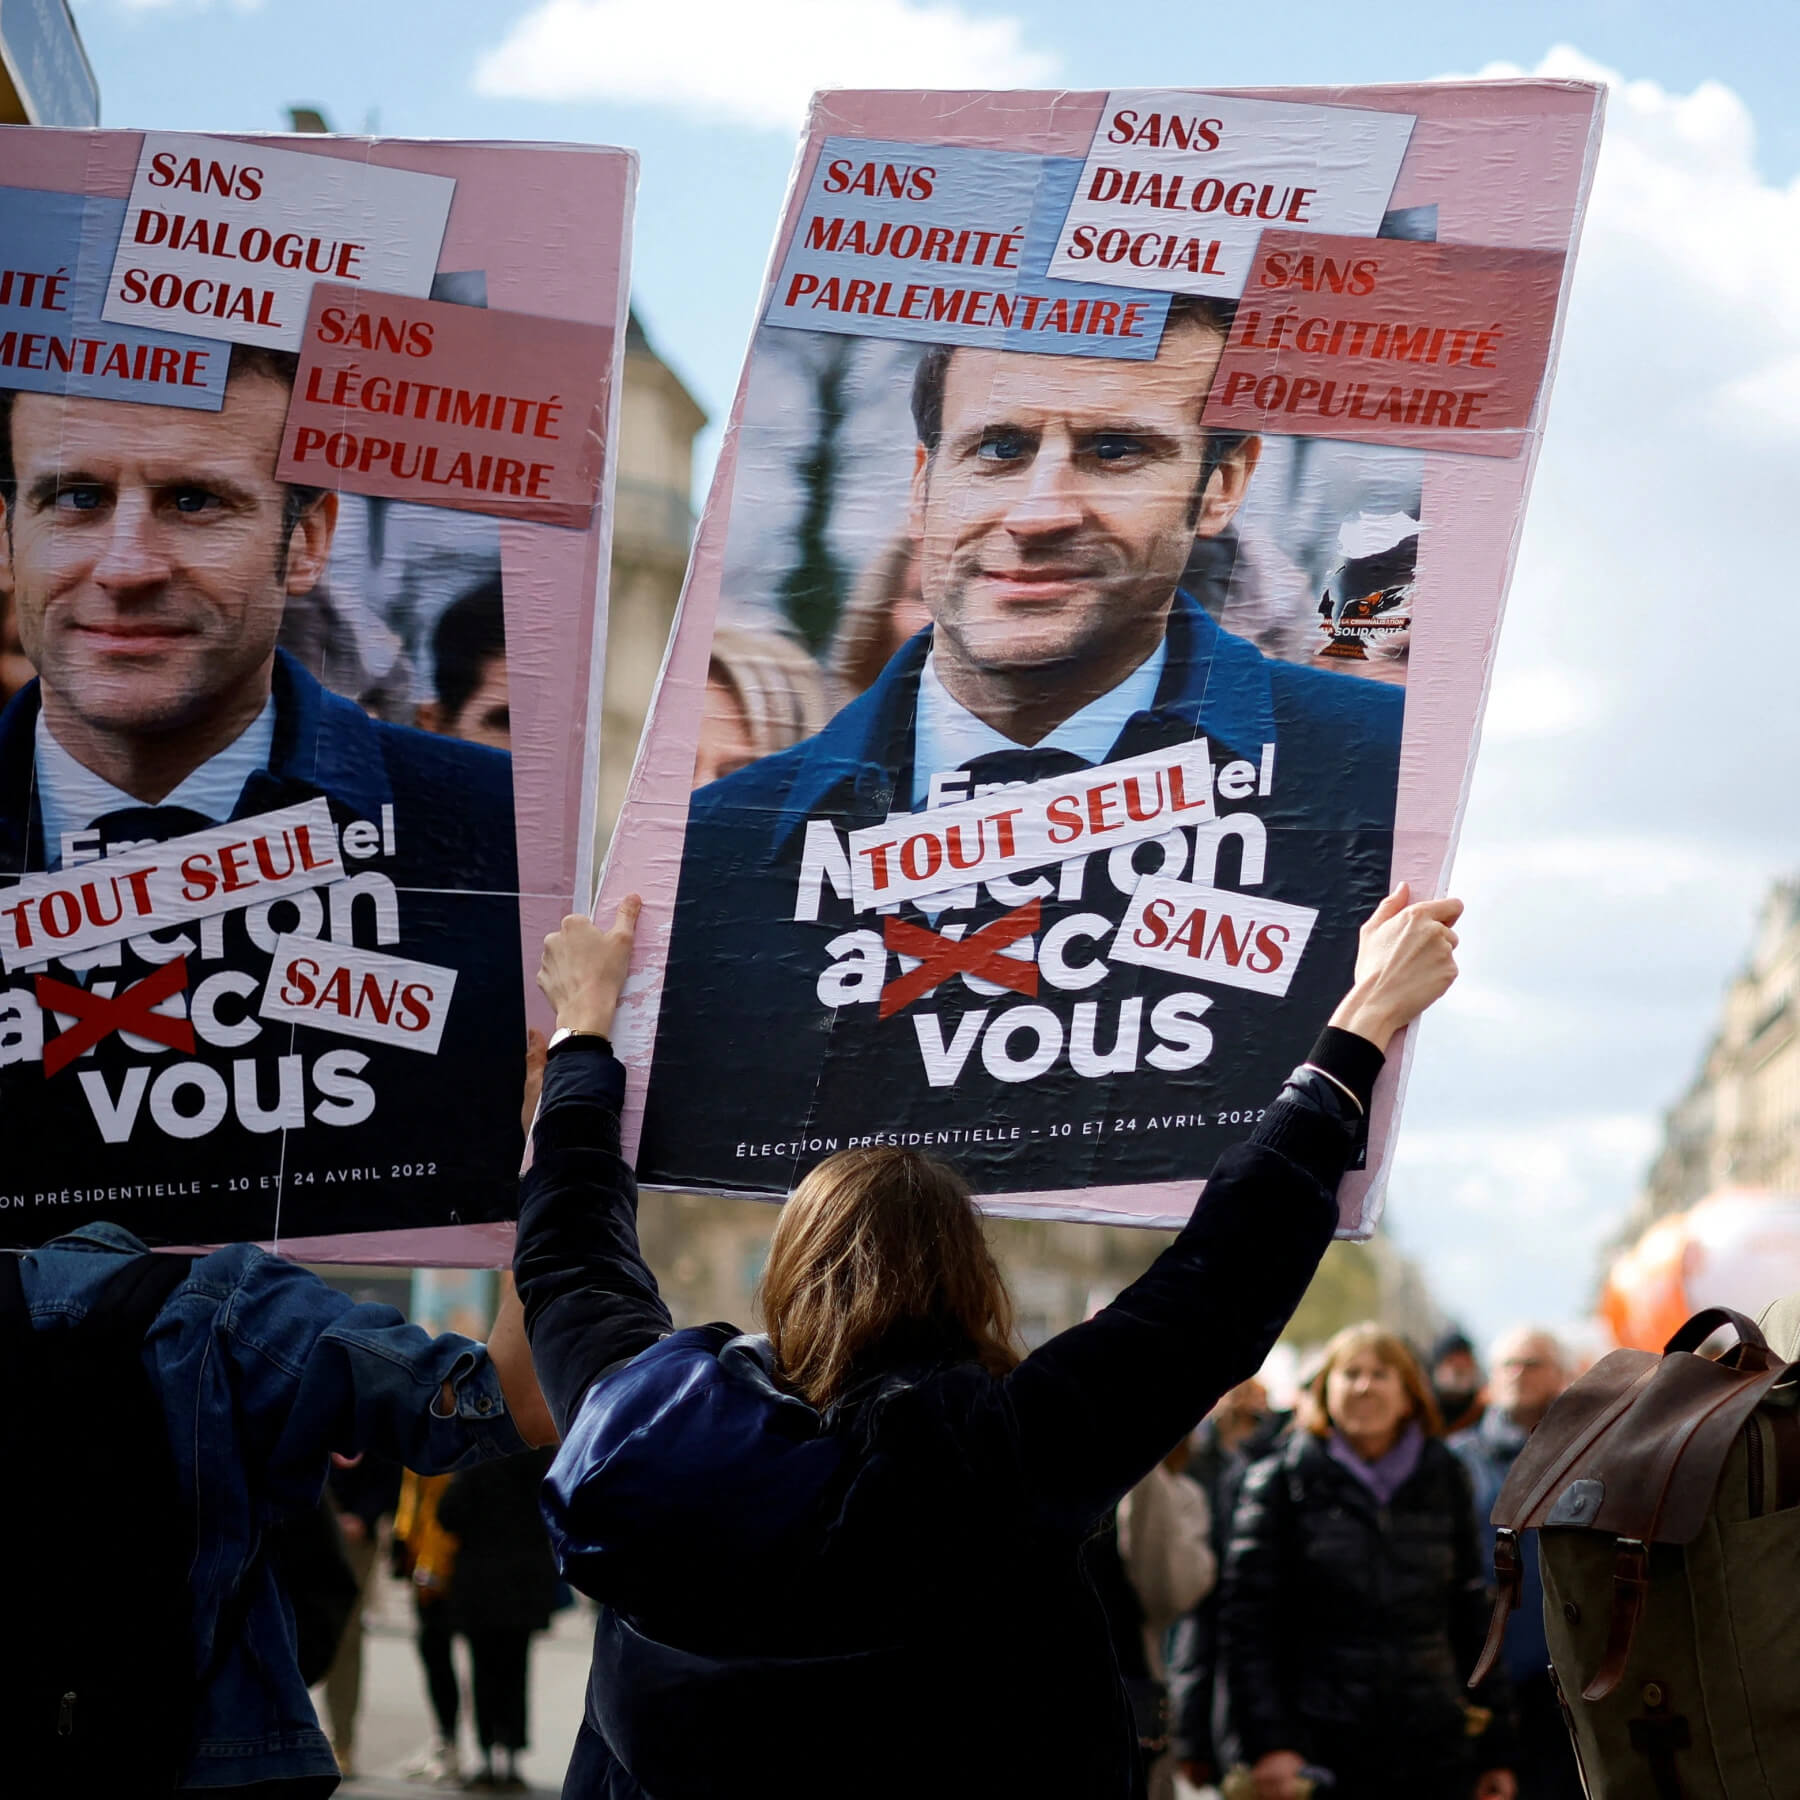 Controversial Pension Reform Passed as a Law Despite Nationwide Protests in France